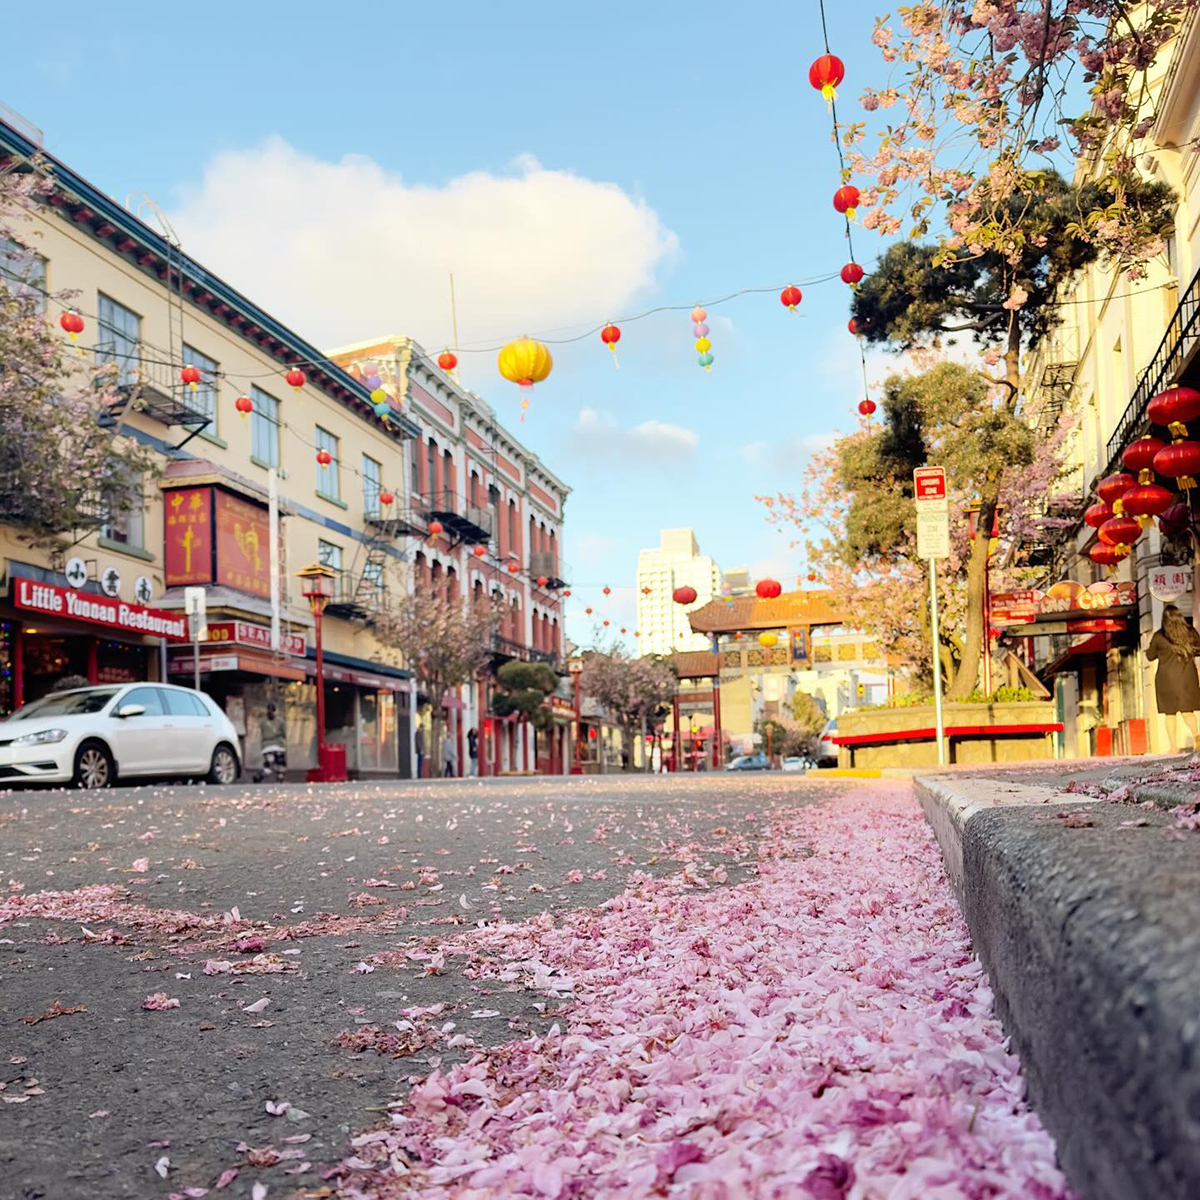 #RT @victoriavisitor: Celebrating the start of May with cherry blossom confetti lining the streets of downtown 🌸🎊

📍: Chinatown
📸: lavyo (IG)

#explorevictoria #chinatown #cherryblossoms #summertravel #downtownvictoria